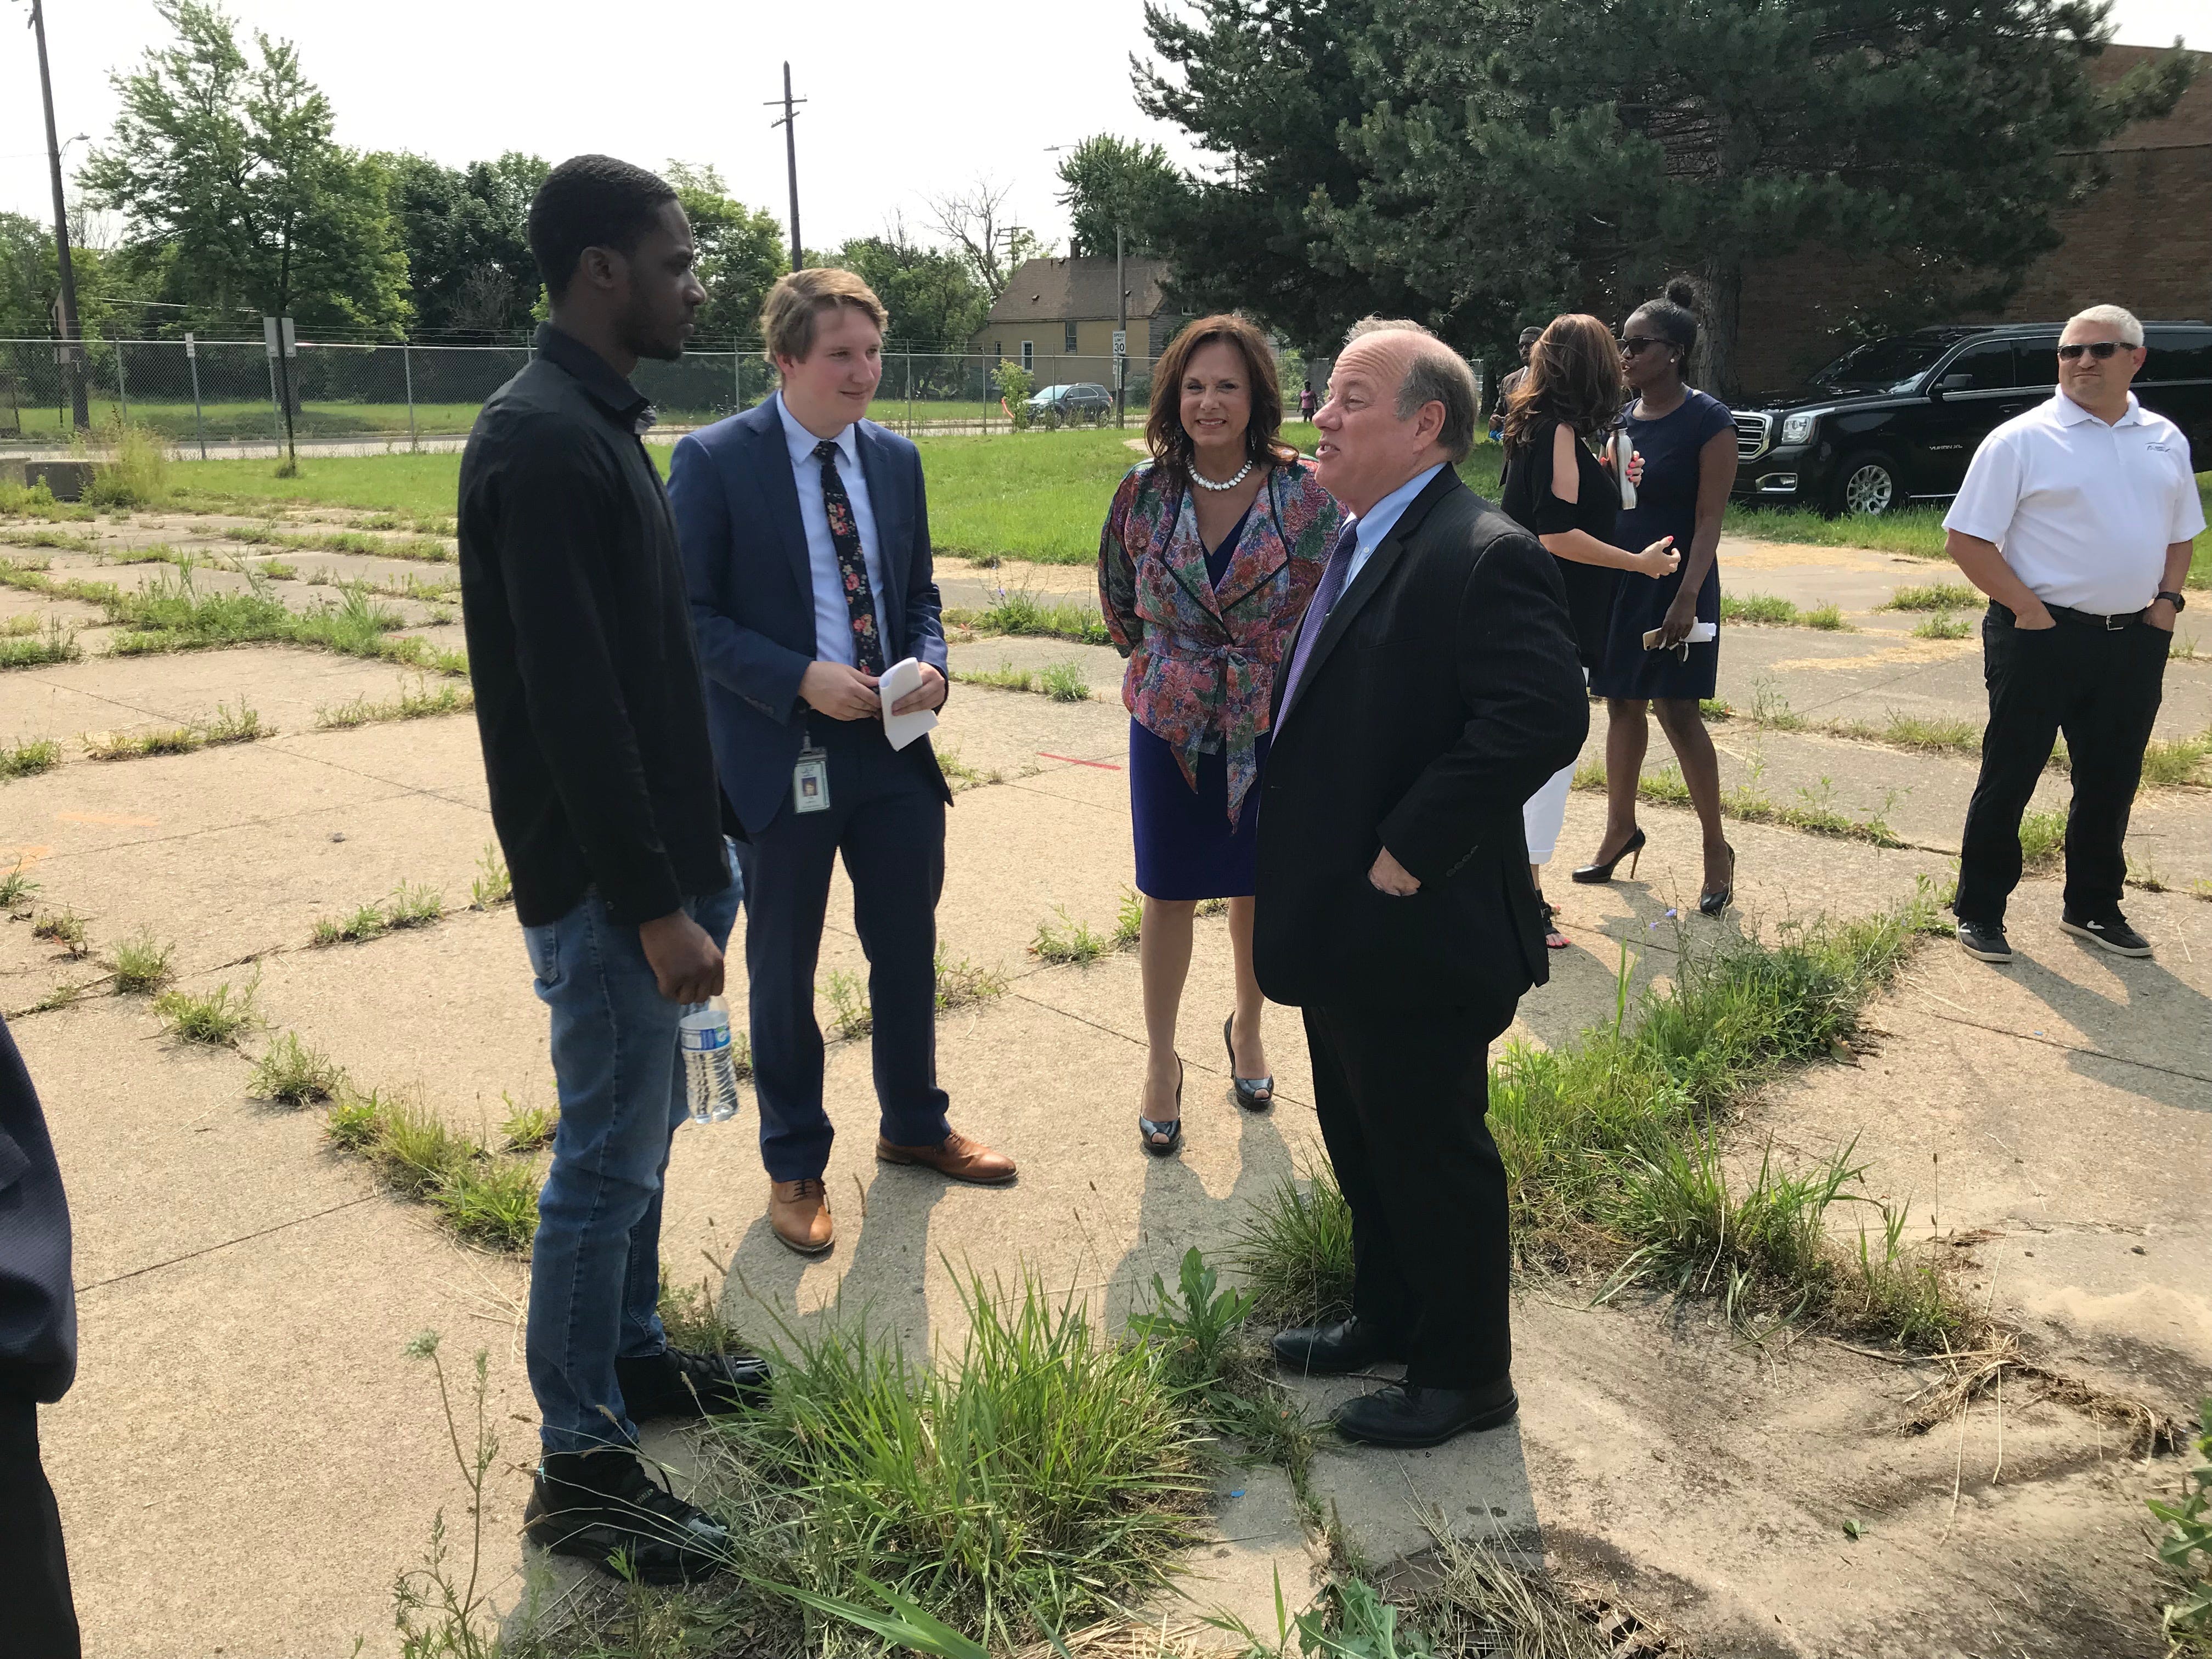 Dakkota Integrated Systems CEO Andra Rush, center, listens as Detroit Mayor Mike Duggan talks to 23-year-old Branden Horner, who came to the announcement of a $55-million manufacturing facility Tuesday hoping to apply for a job.